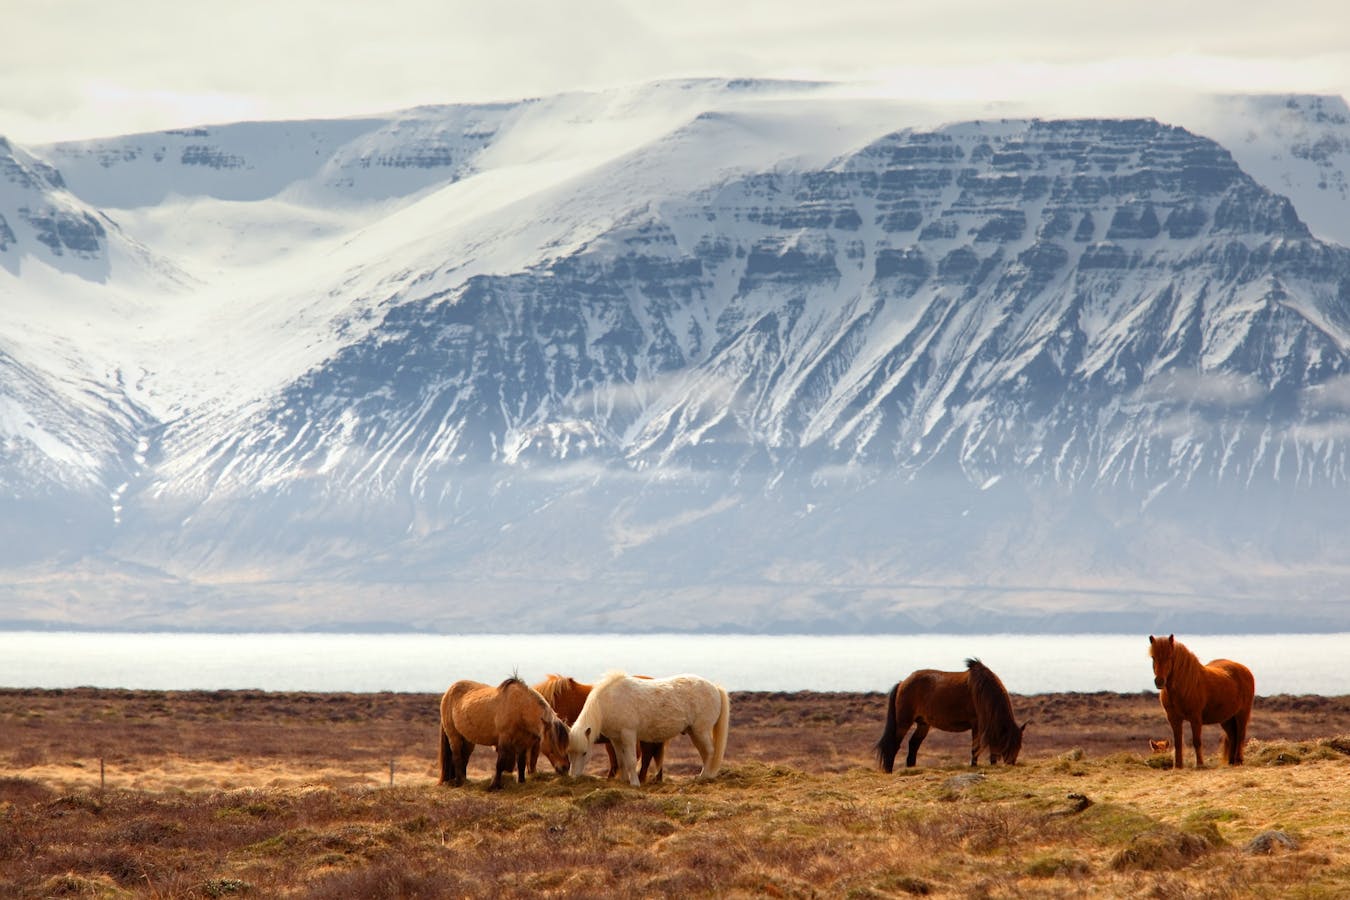 Ponies in Iceland in front of a snow capped mountain